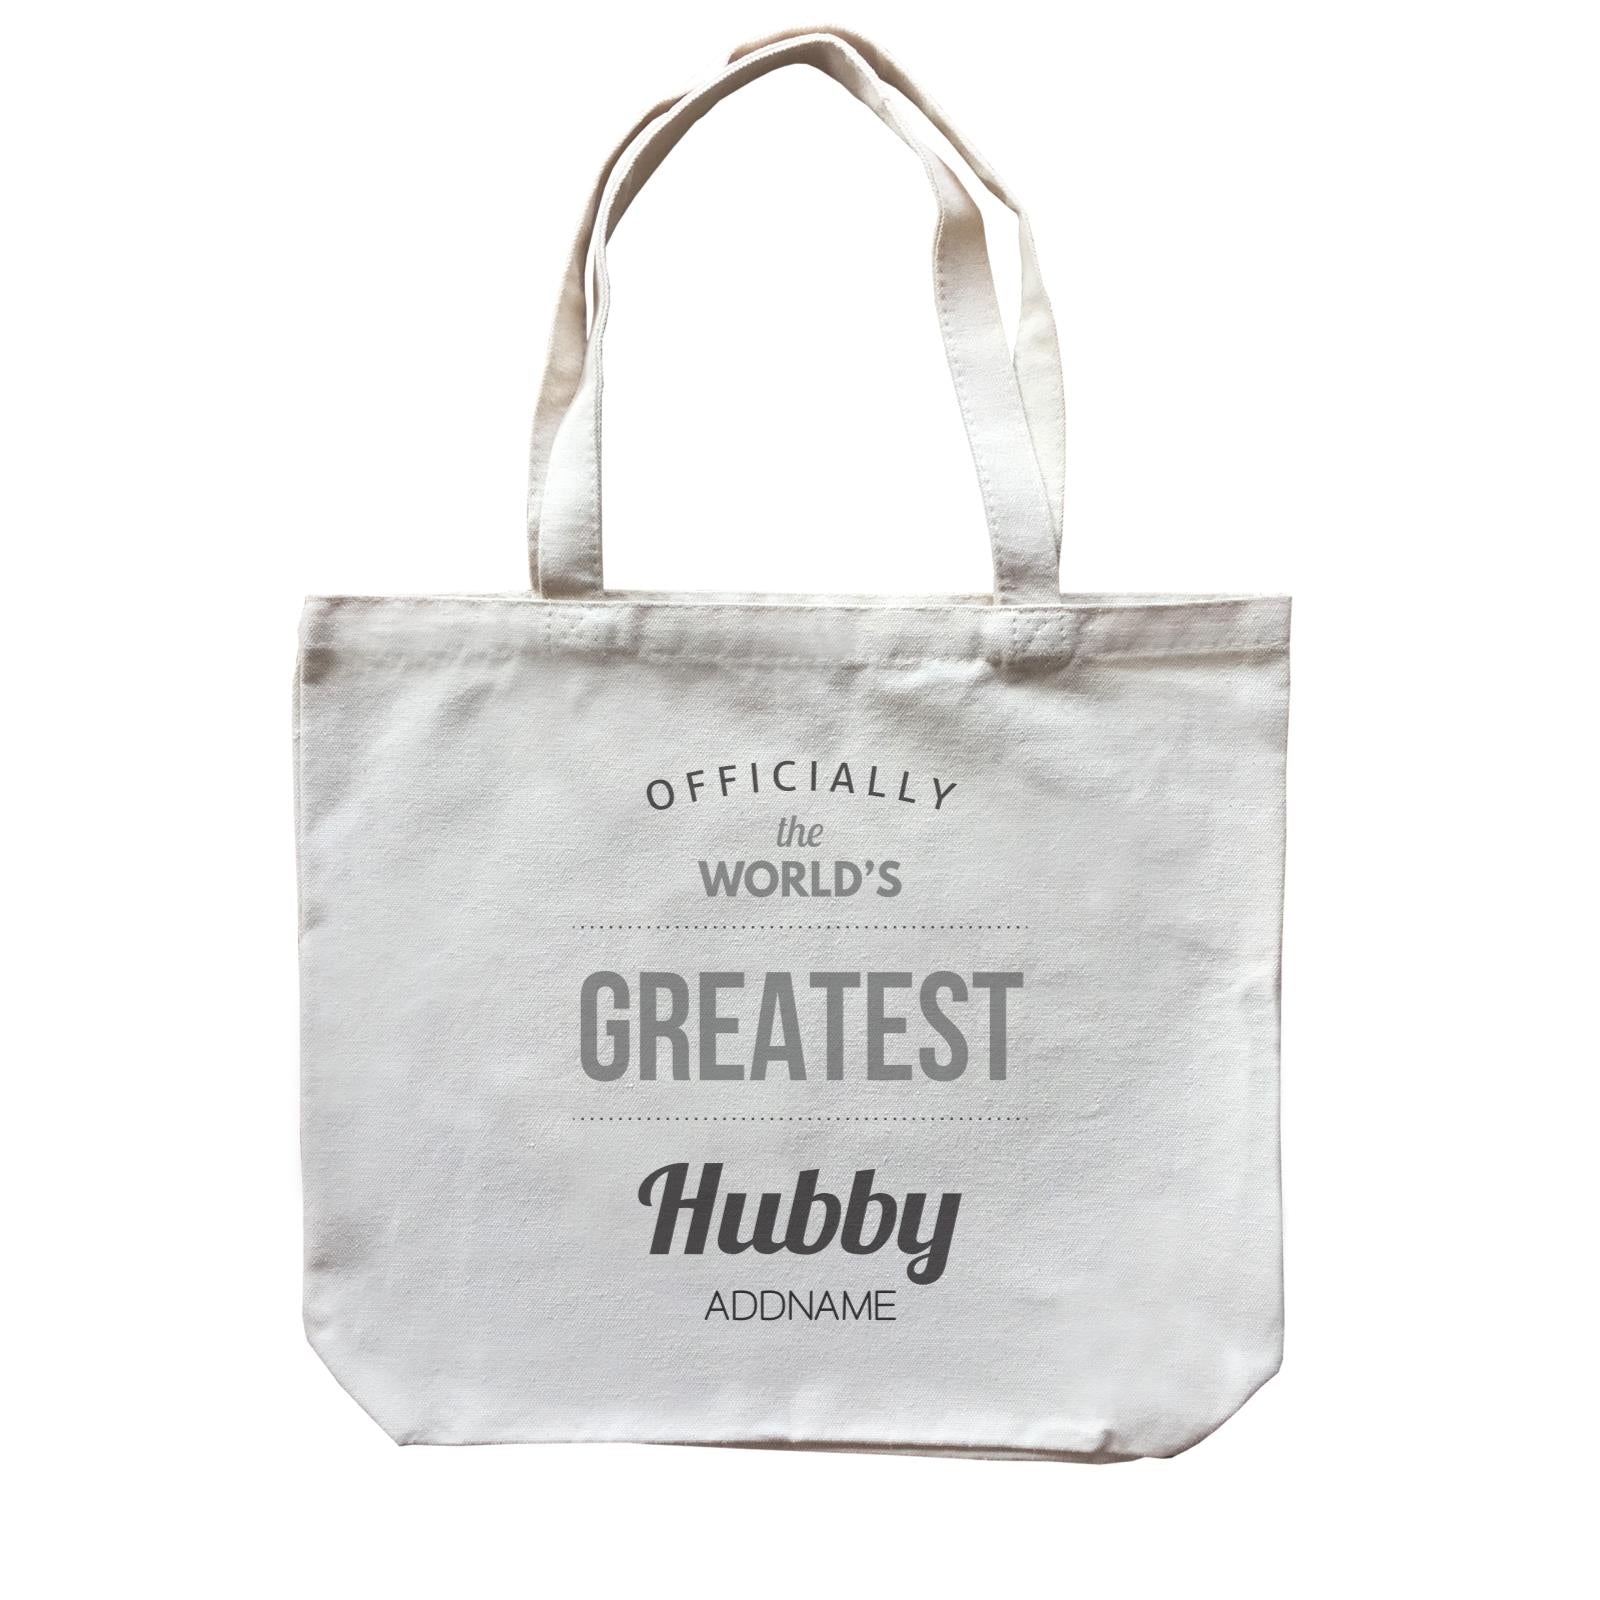 Husband and Wife Officially The World's Geatest Hubby Addname Canvas Bag